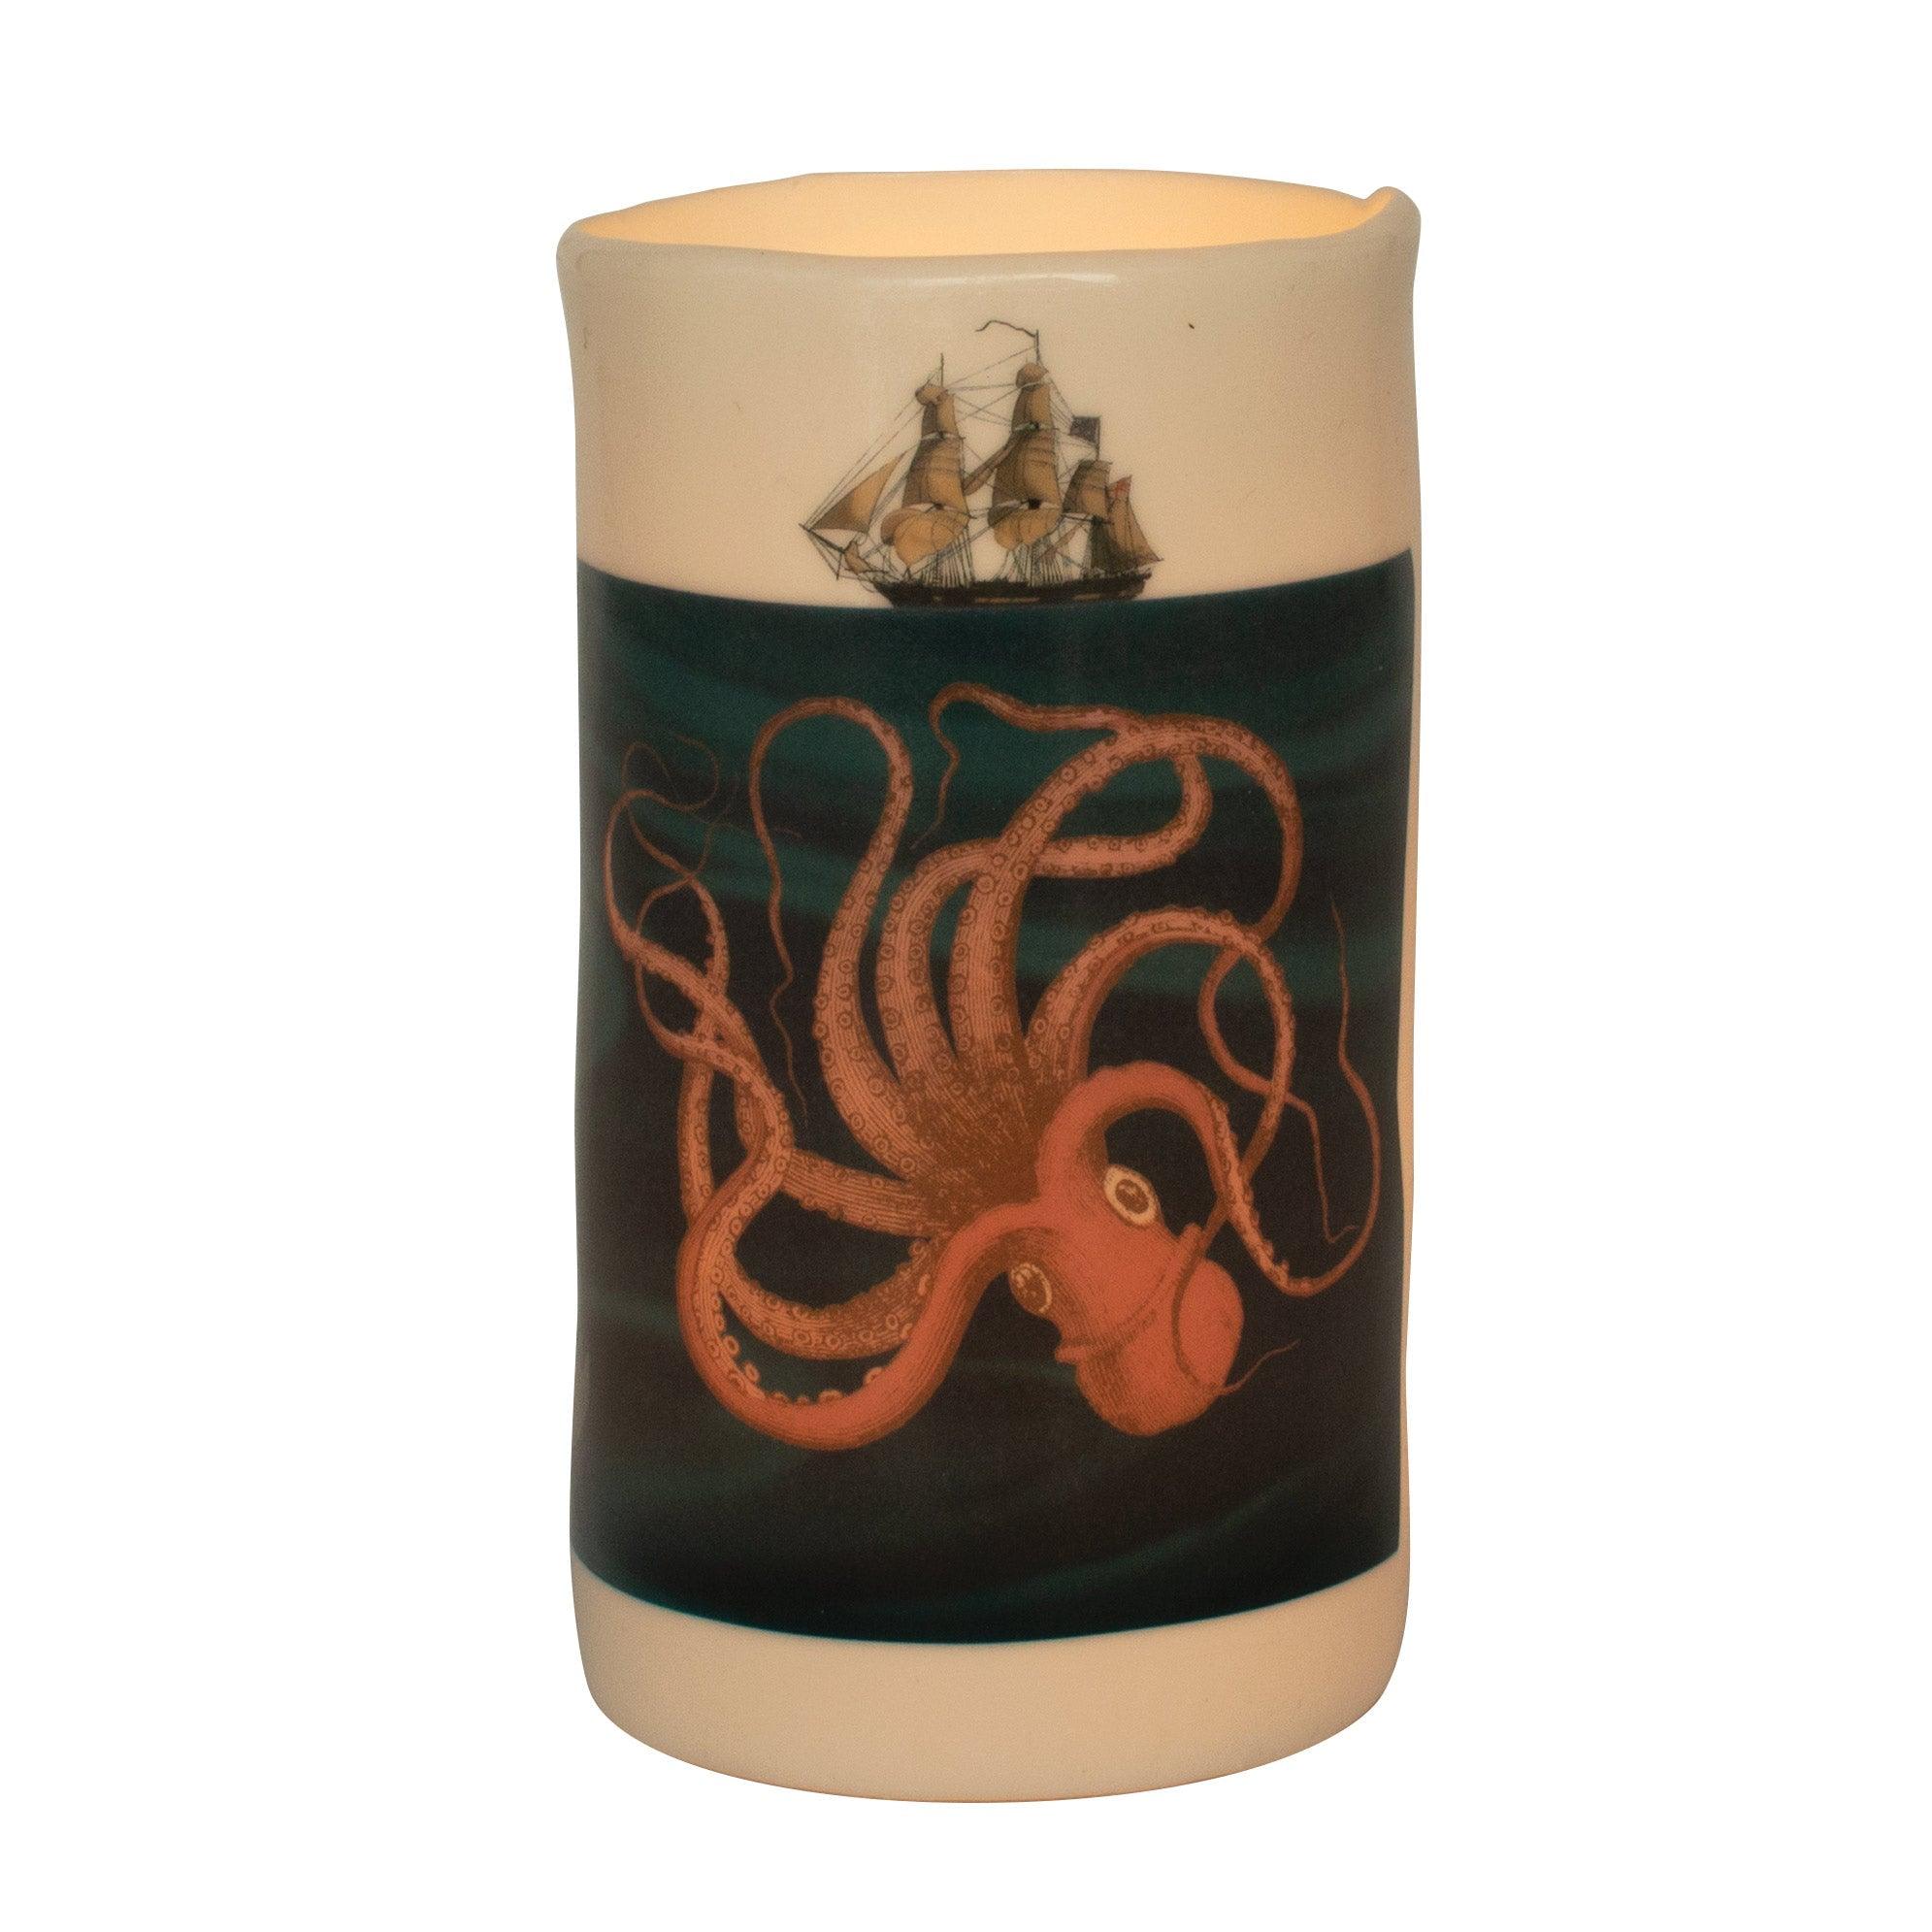 Product photo of Sea Creatures Transforming Tealight Holder, a novelty gift manufactured by The Unemployed Philosophers Guild.